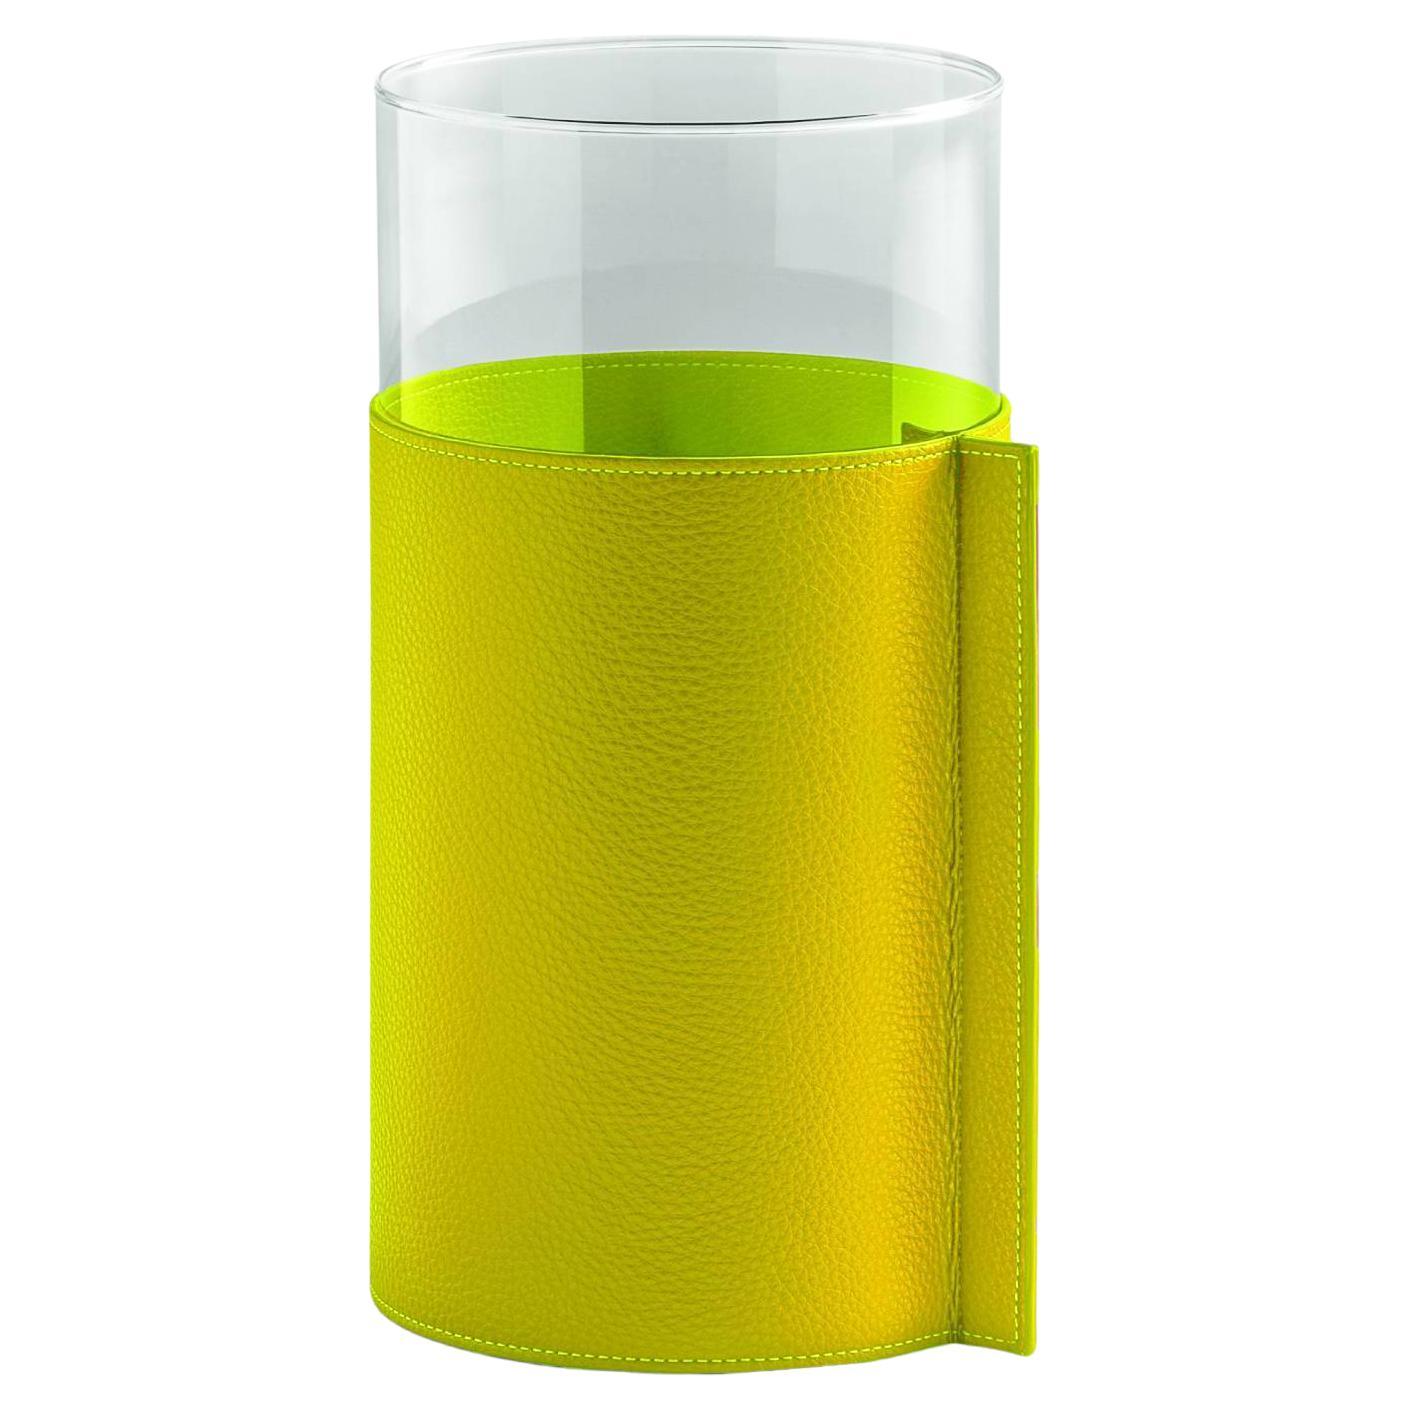 Leather Pot High Glass Vase Covered with Leather Pelle SC 140 Mimosa Yellow